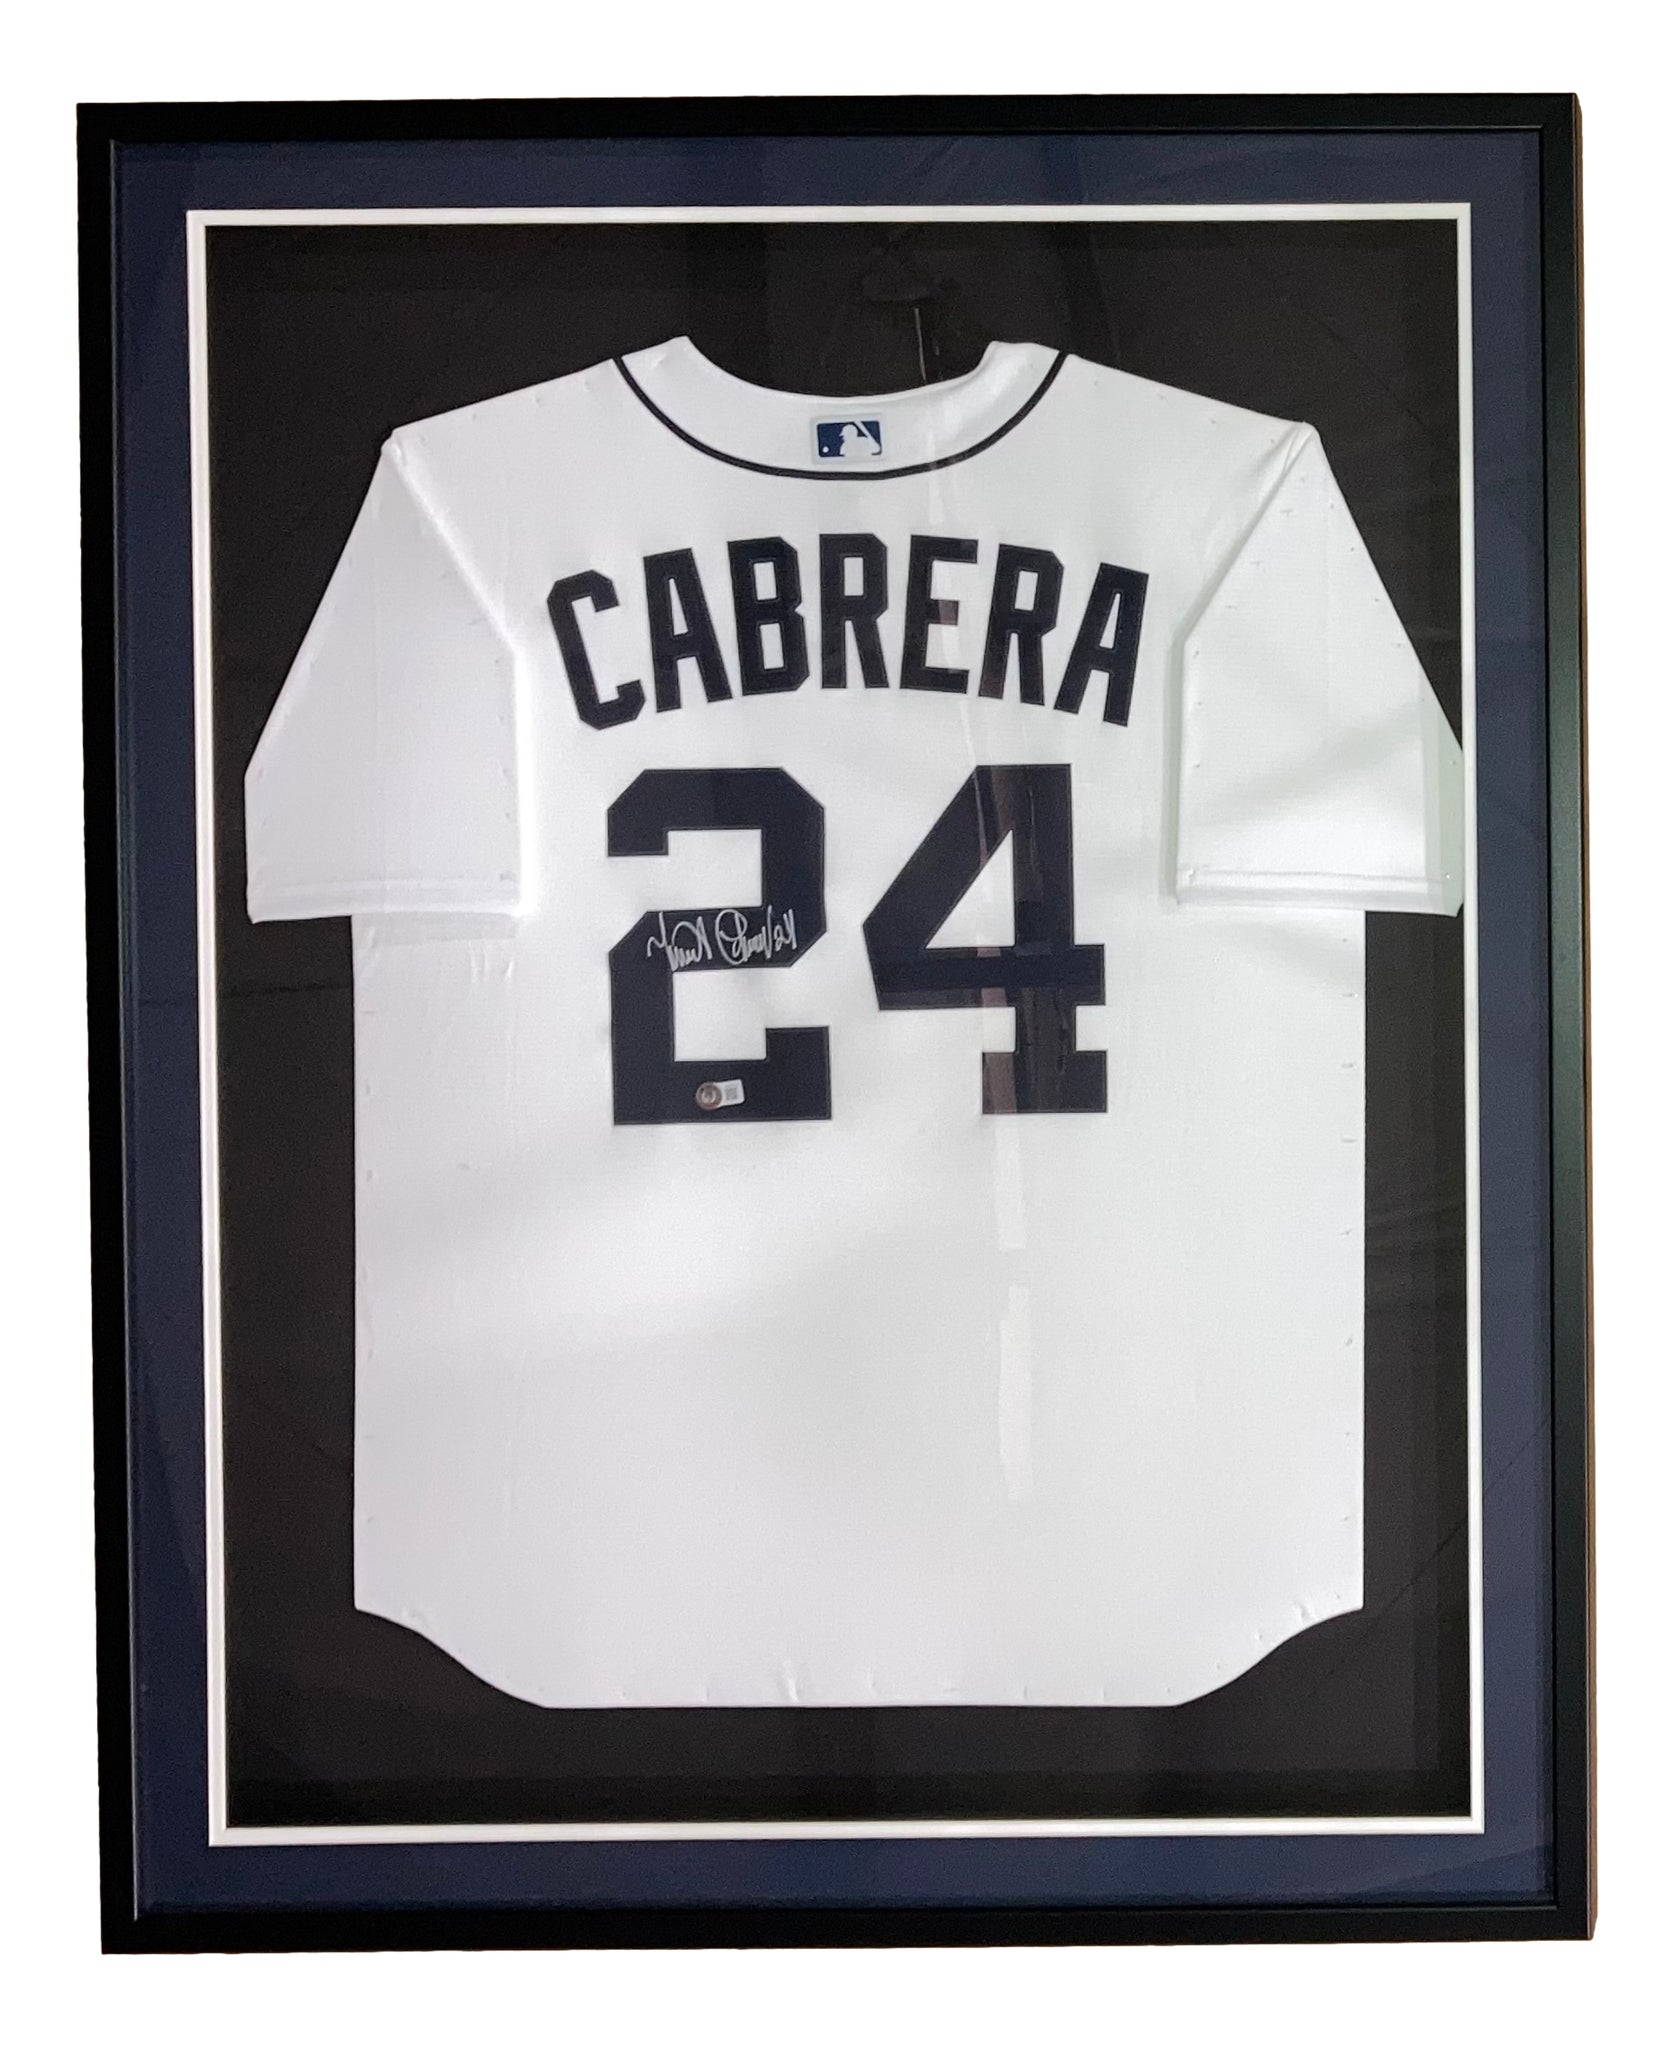 Miguel Cabrera 2022 Major League Baseball All-Star Game Autographed Jersey